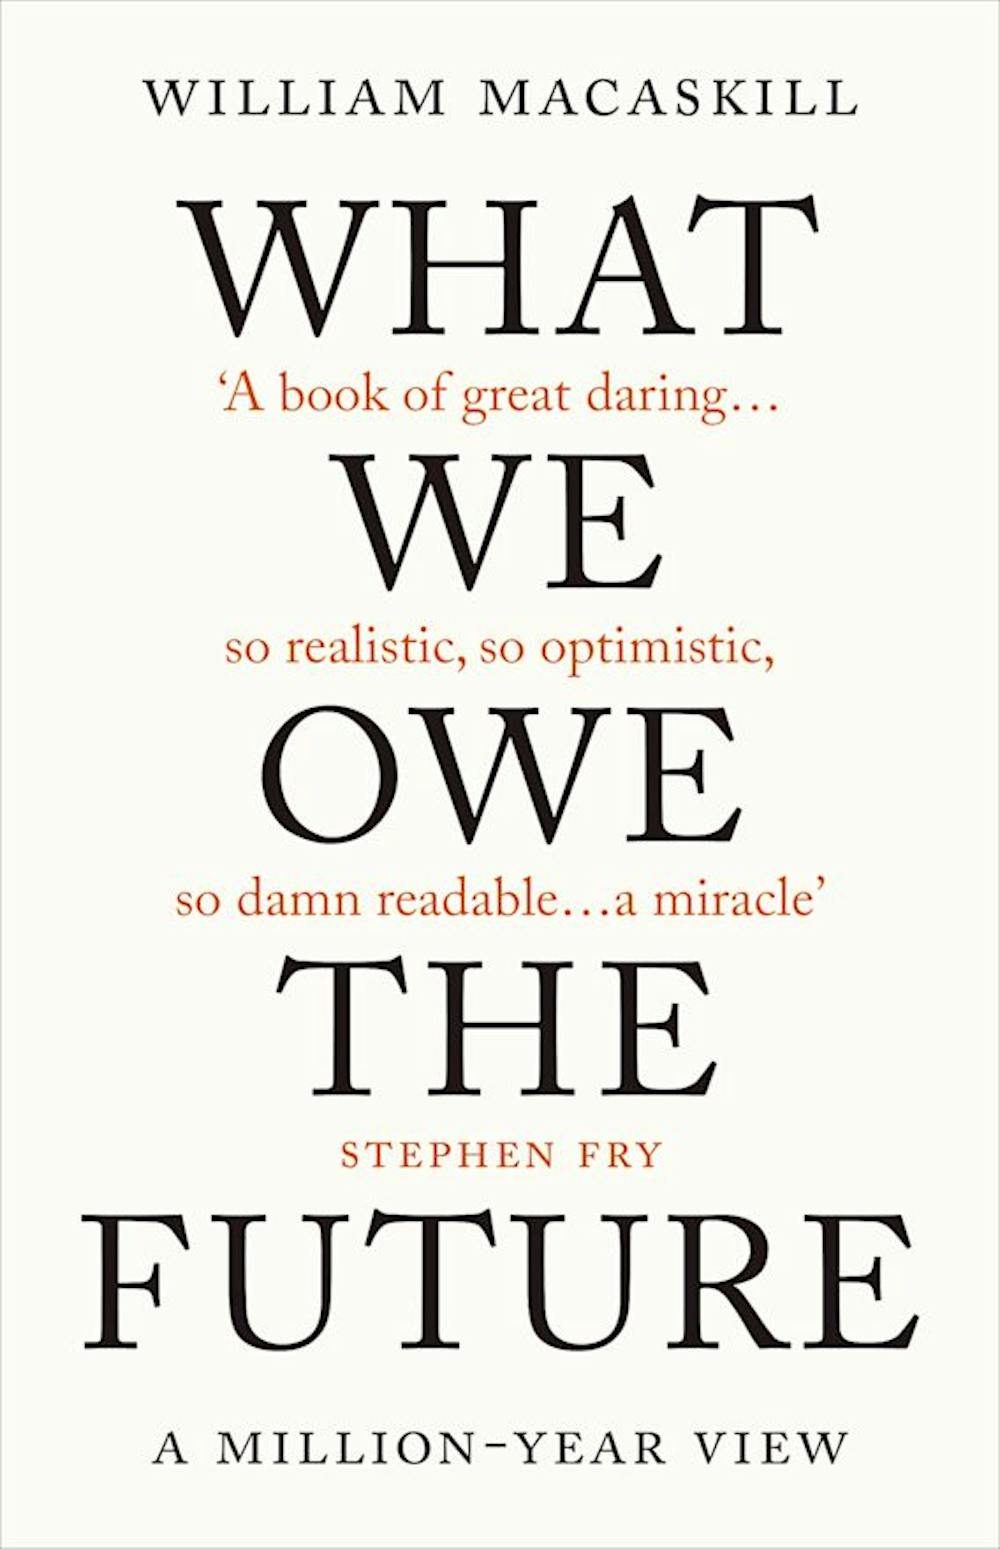 What do owe future generations? And what can we to make world better place?